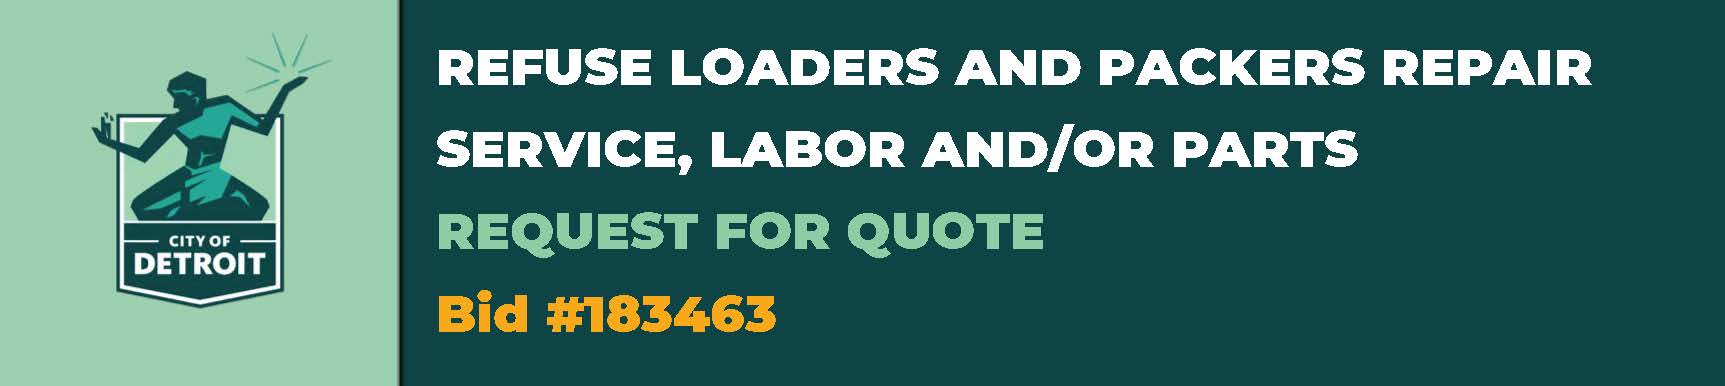 REFUSE LOADERS AND PACKERS REPAIR SERVICE, LABOR AND/OR PARTS